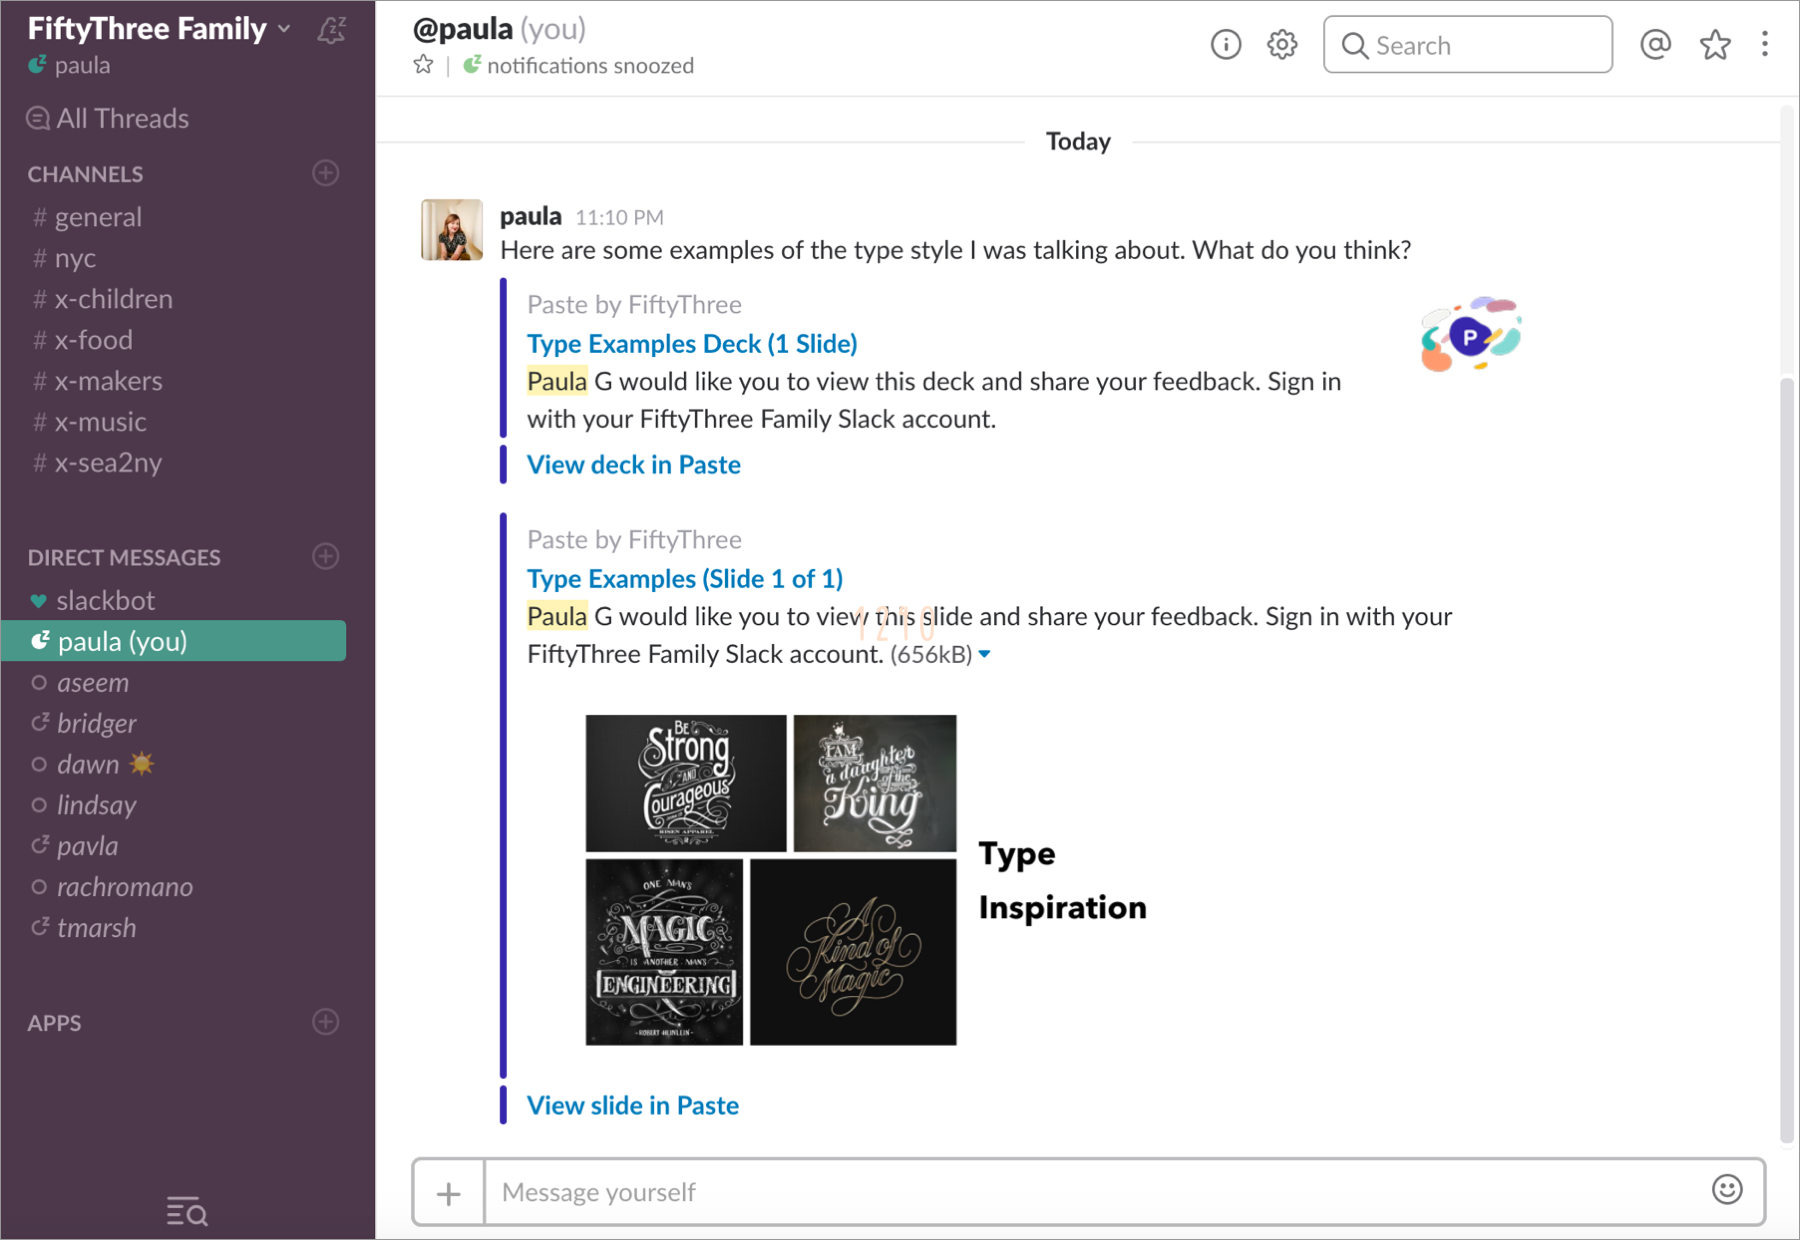  Feedback is delivered through fully-synced Slack threads and messages. 